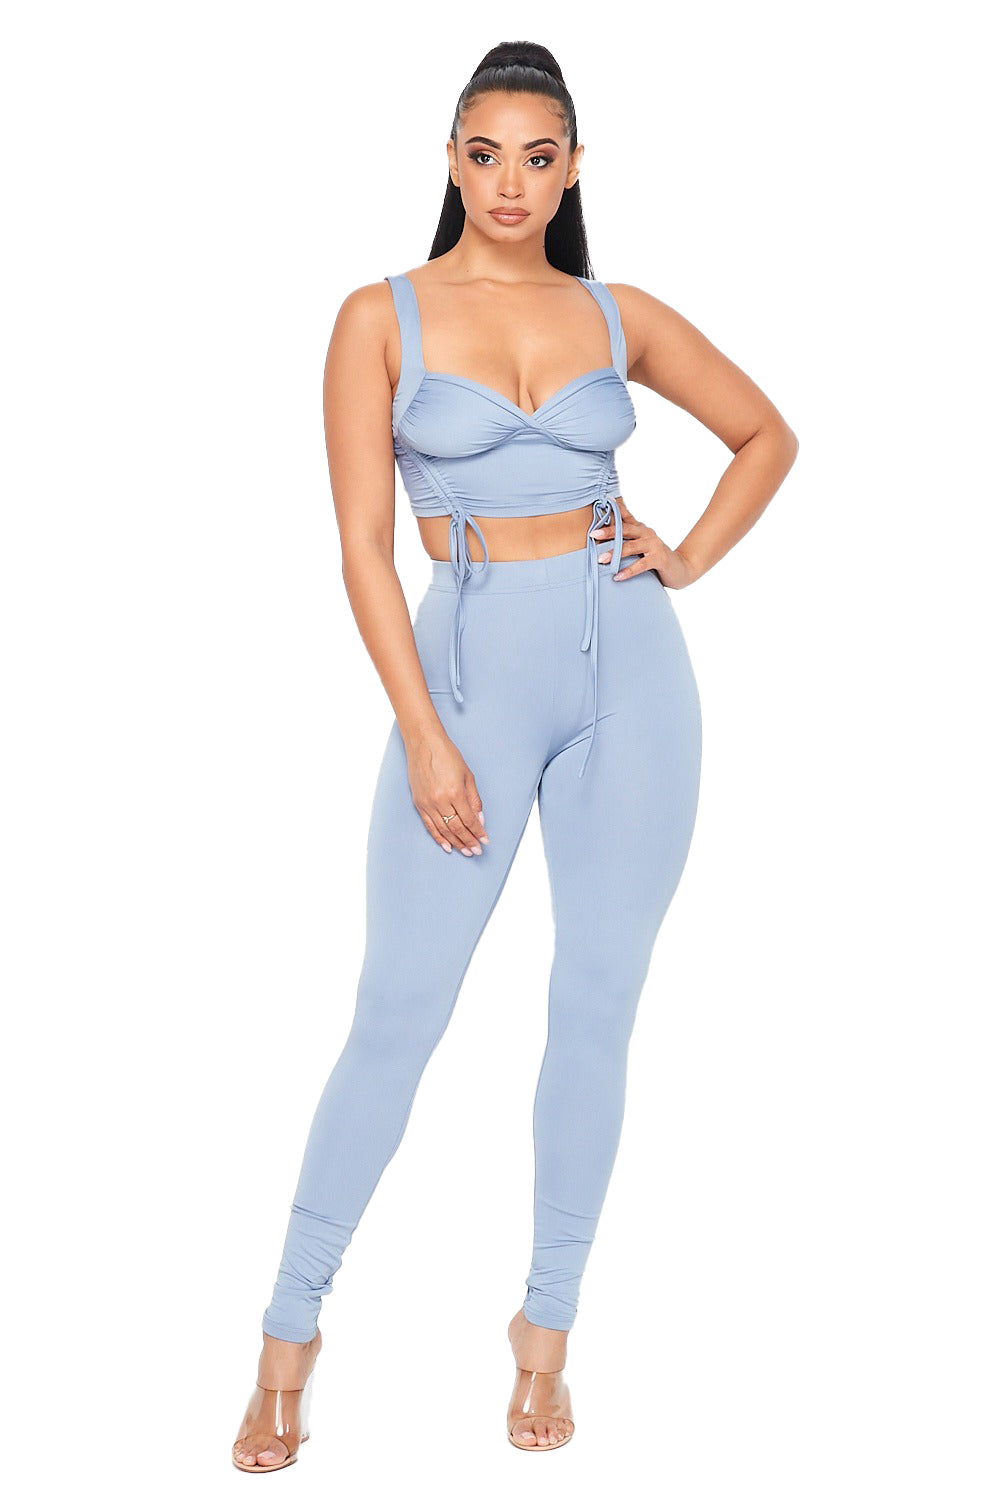 2 PC Ruched Crop Tank Top Legging Set The House of Stylez